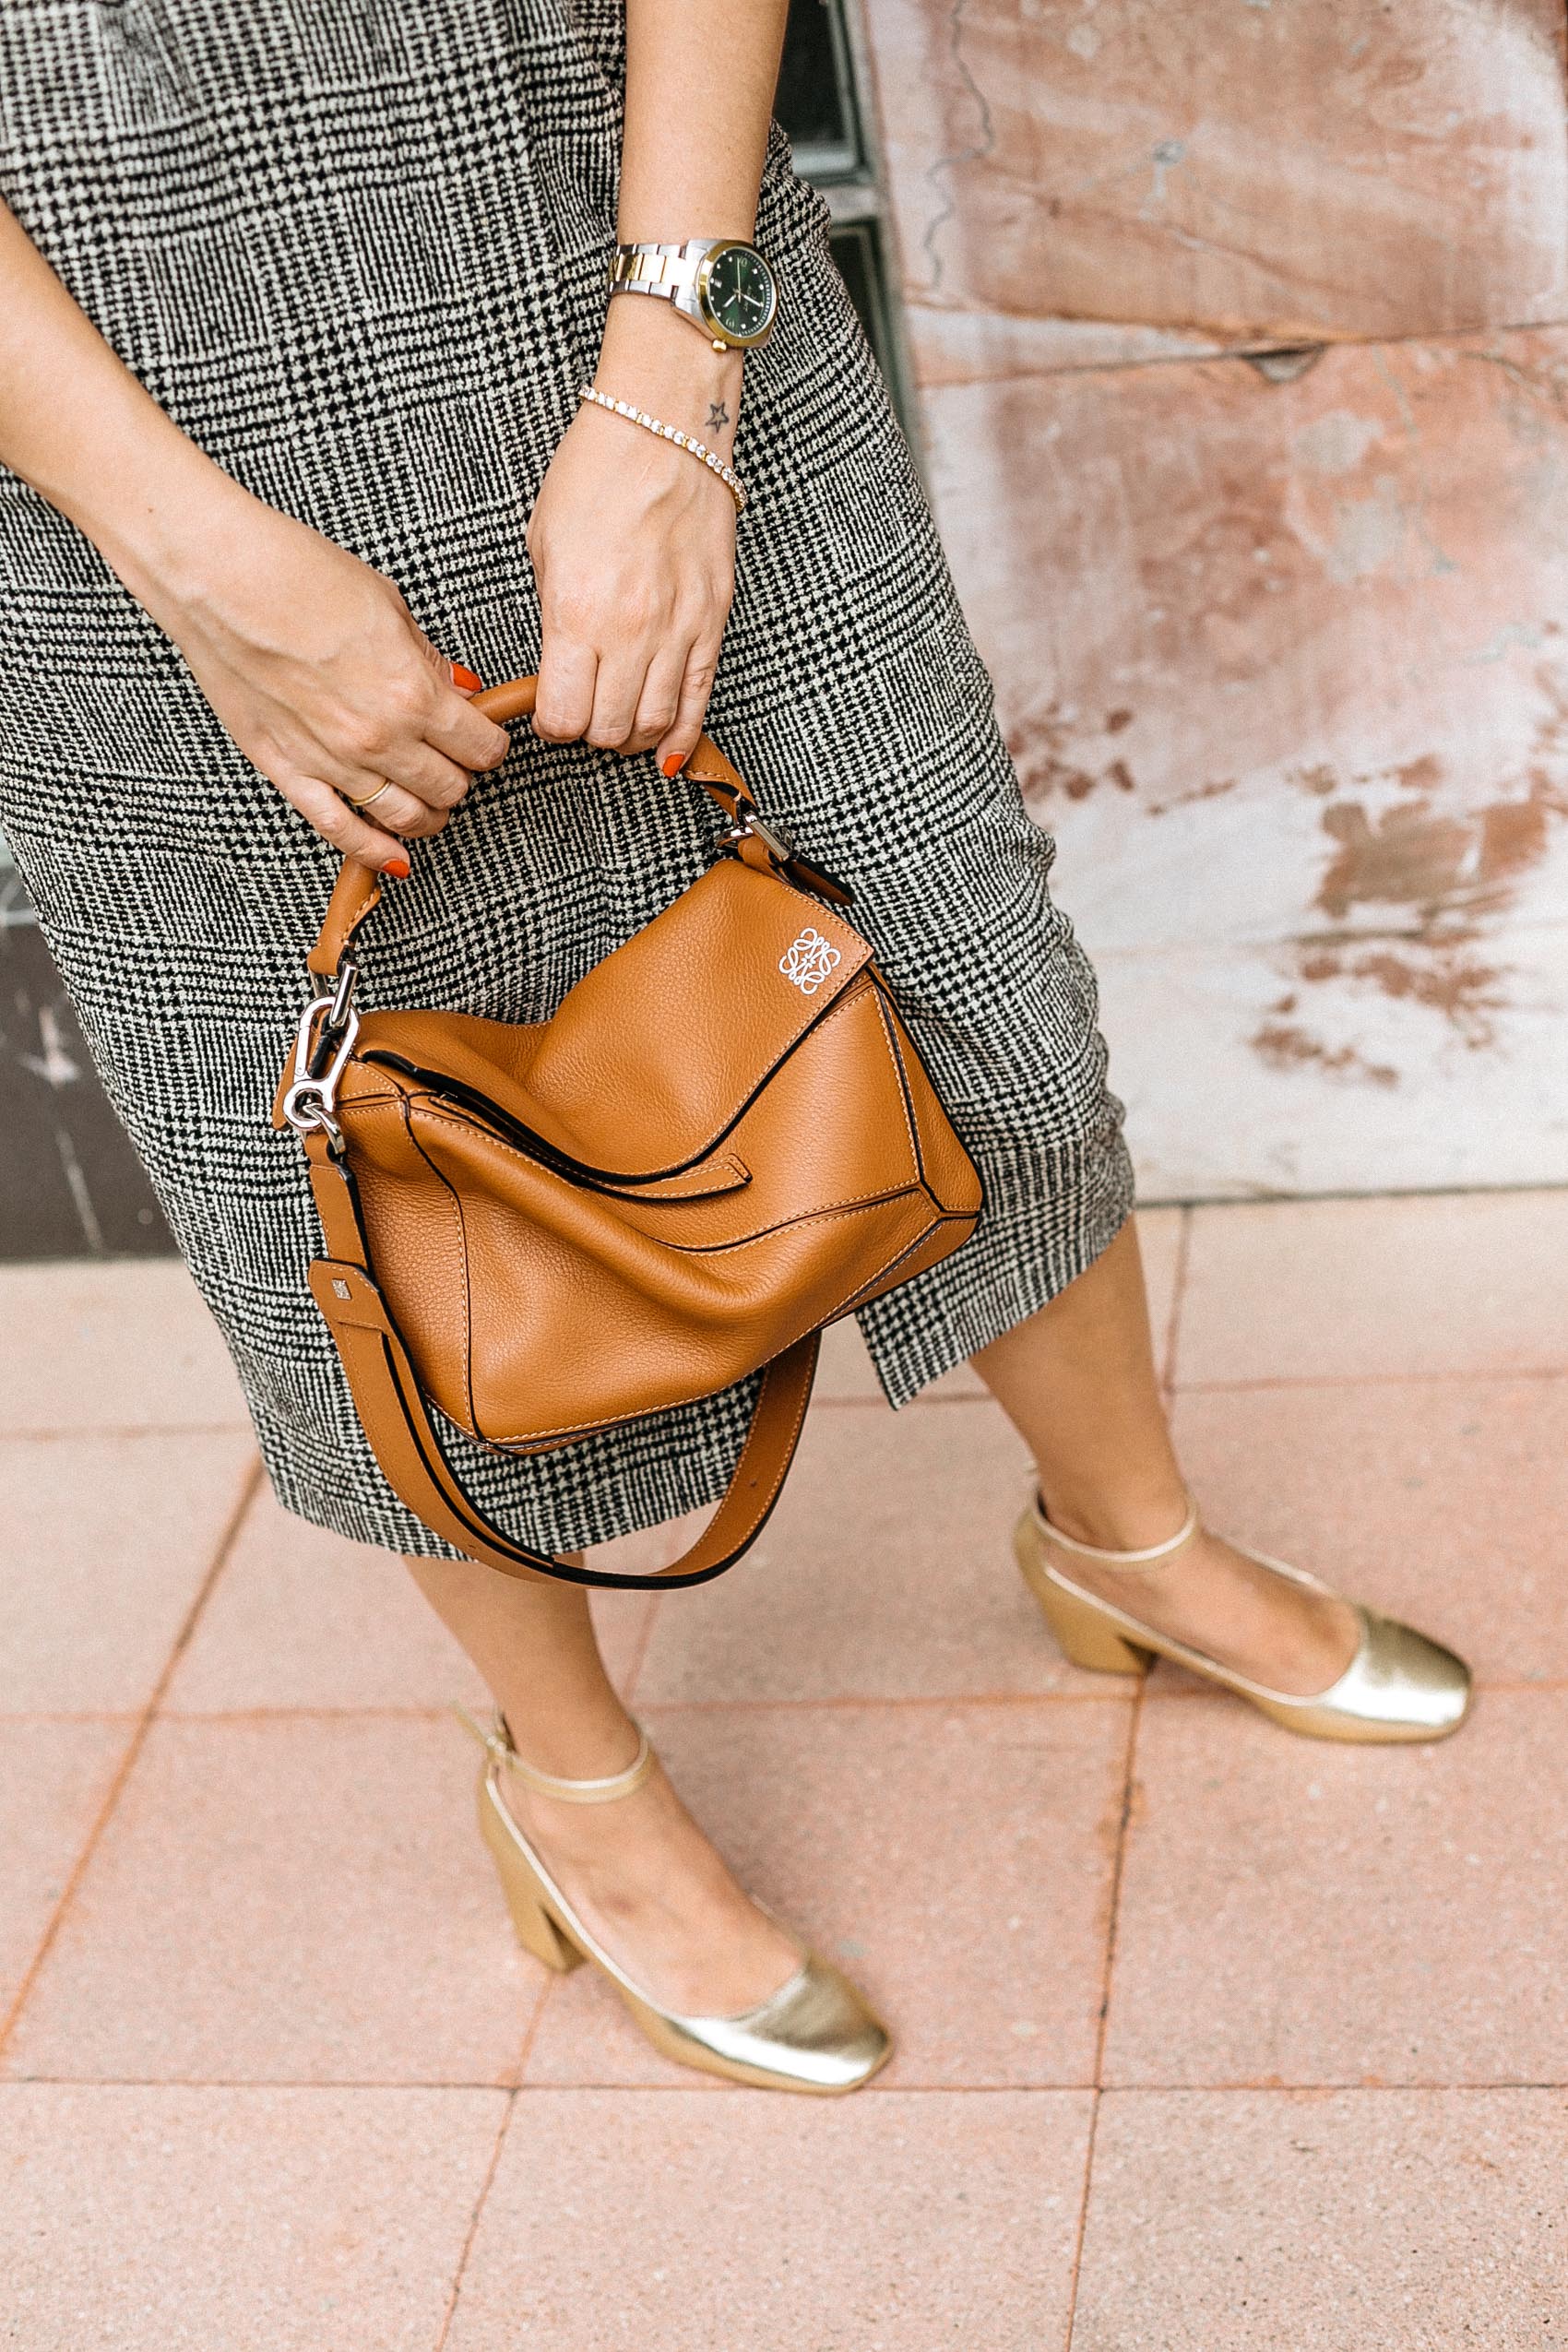 Loewe Puzzle bag in tan leather, plaid wool skirt and gold Mary Jane block heels